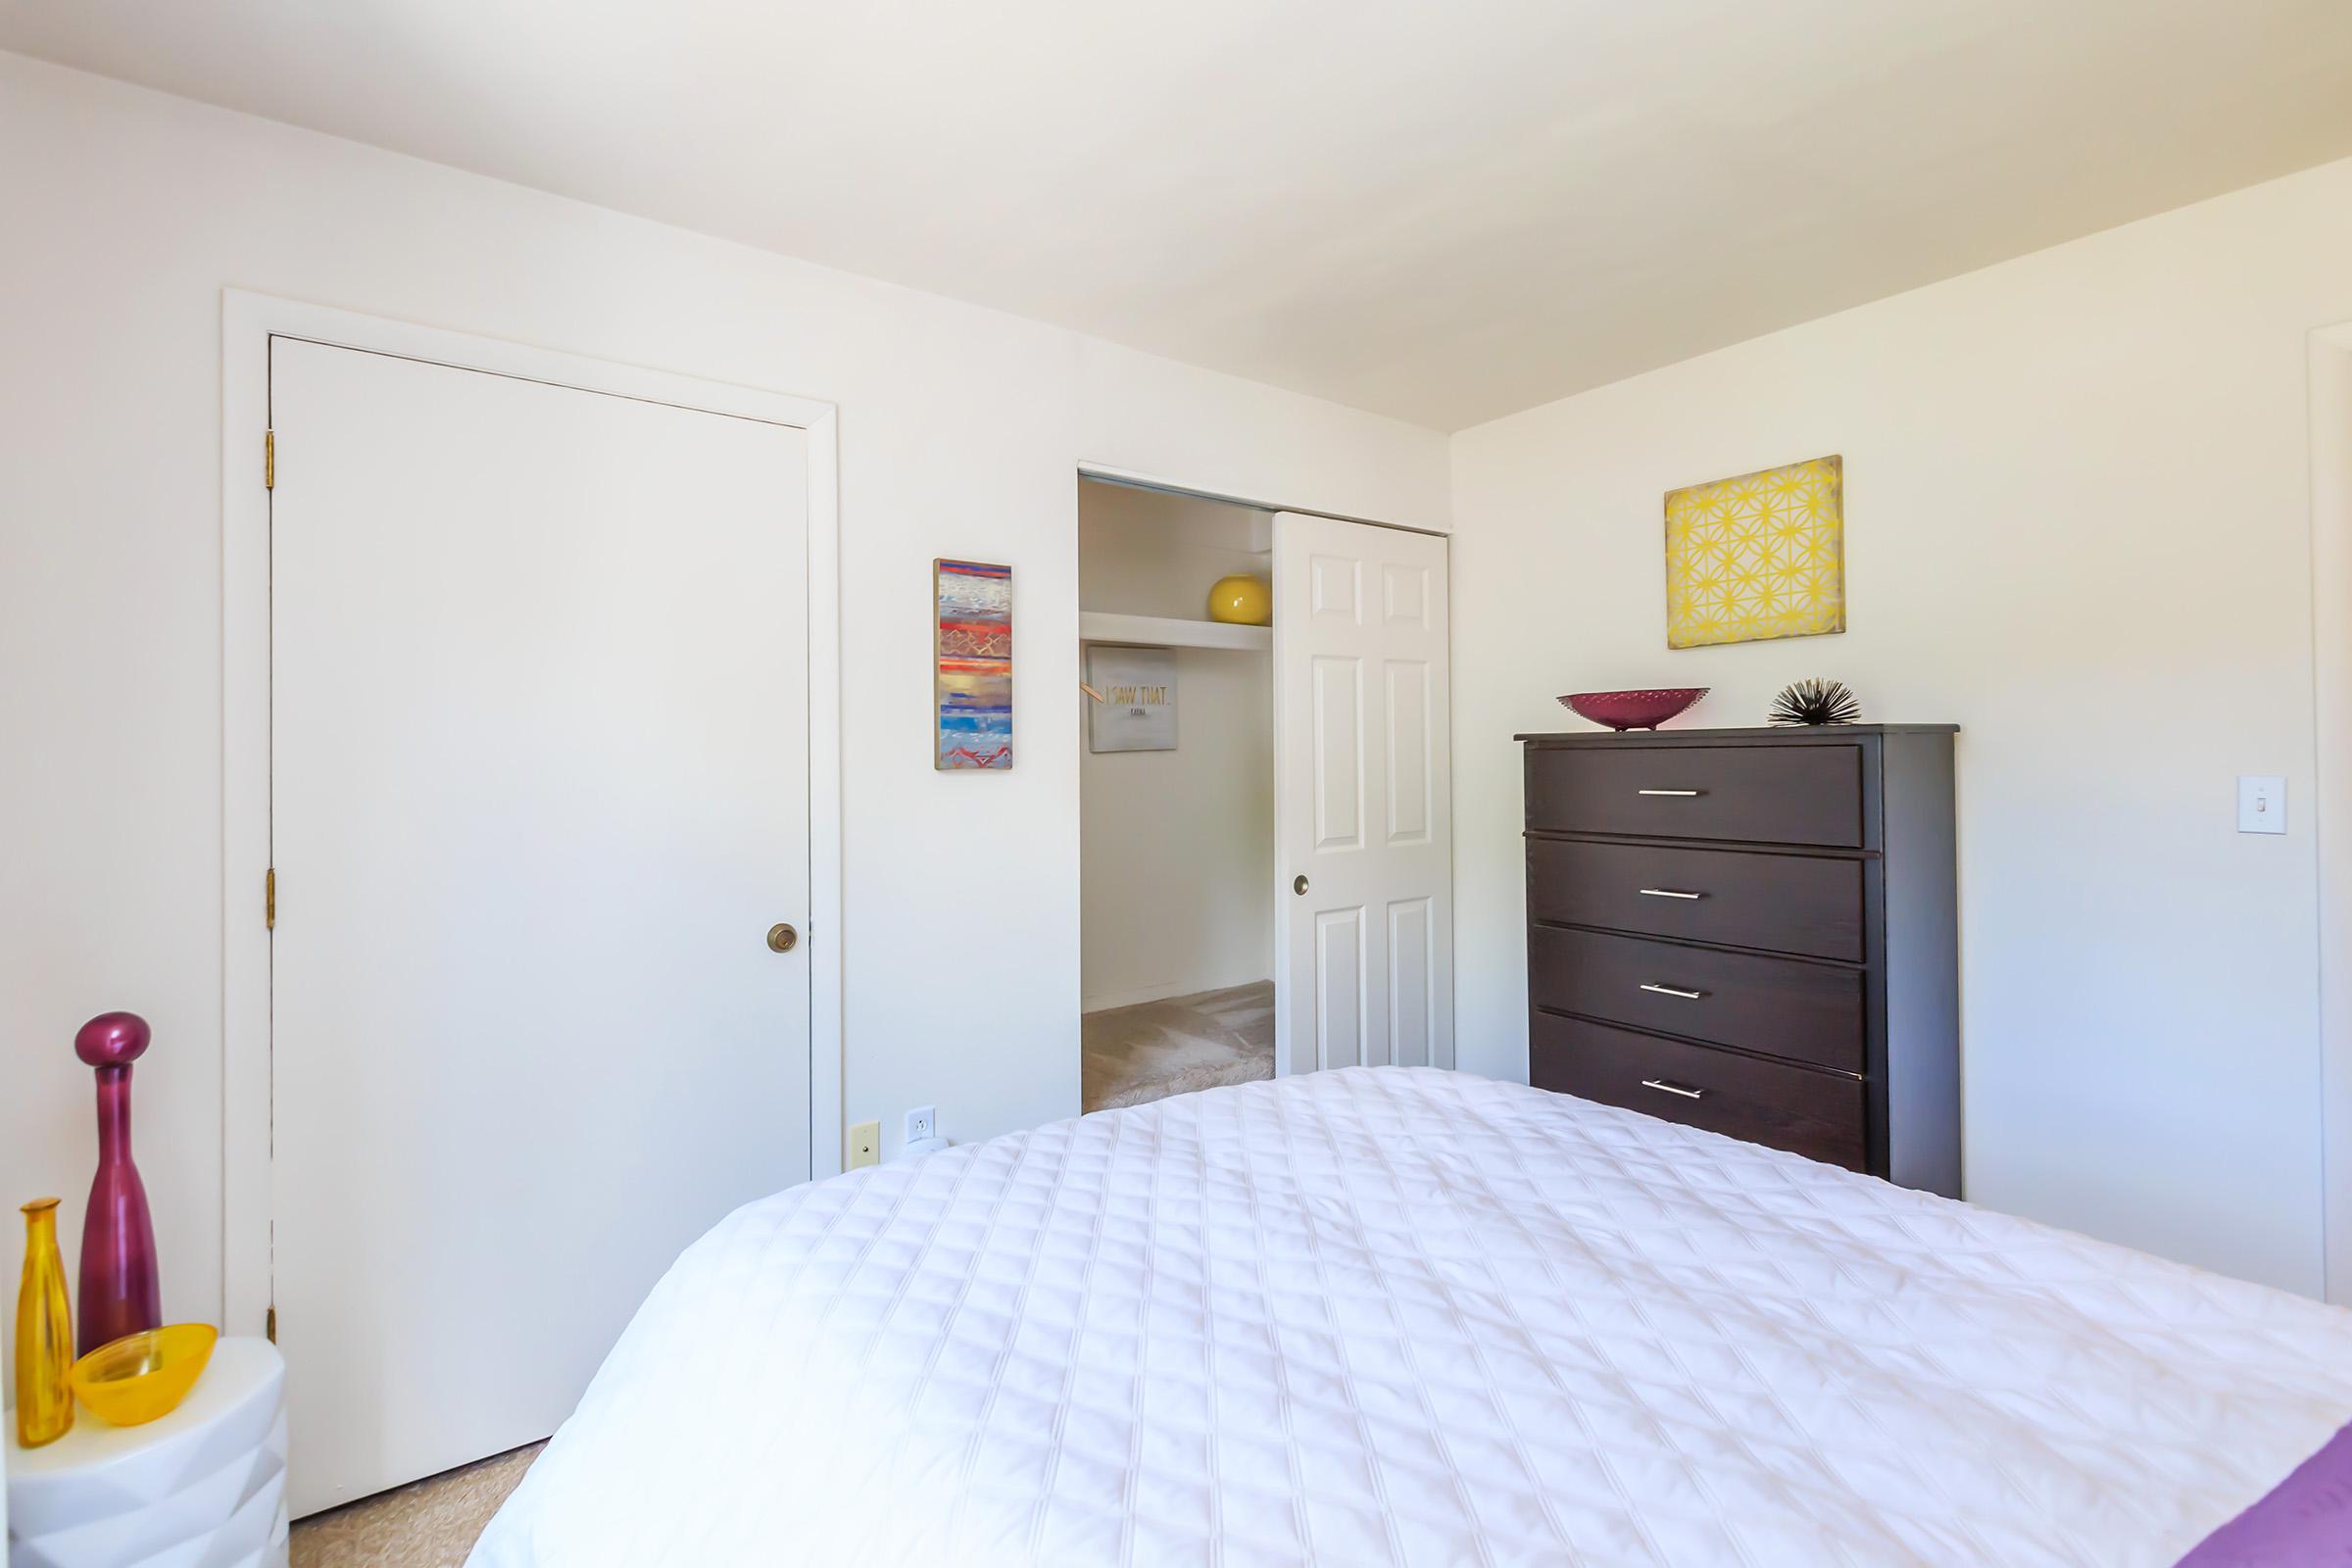 SPACIOUS BEDROOMS AND EXTRA STORAGE